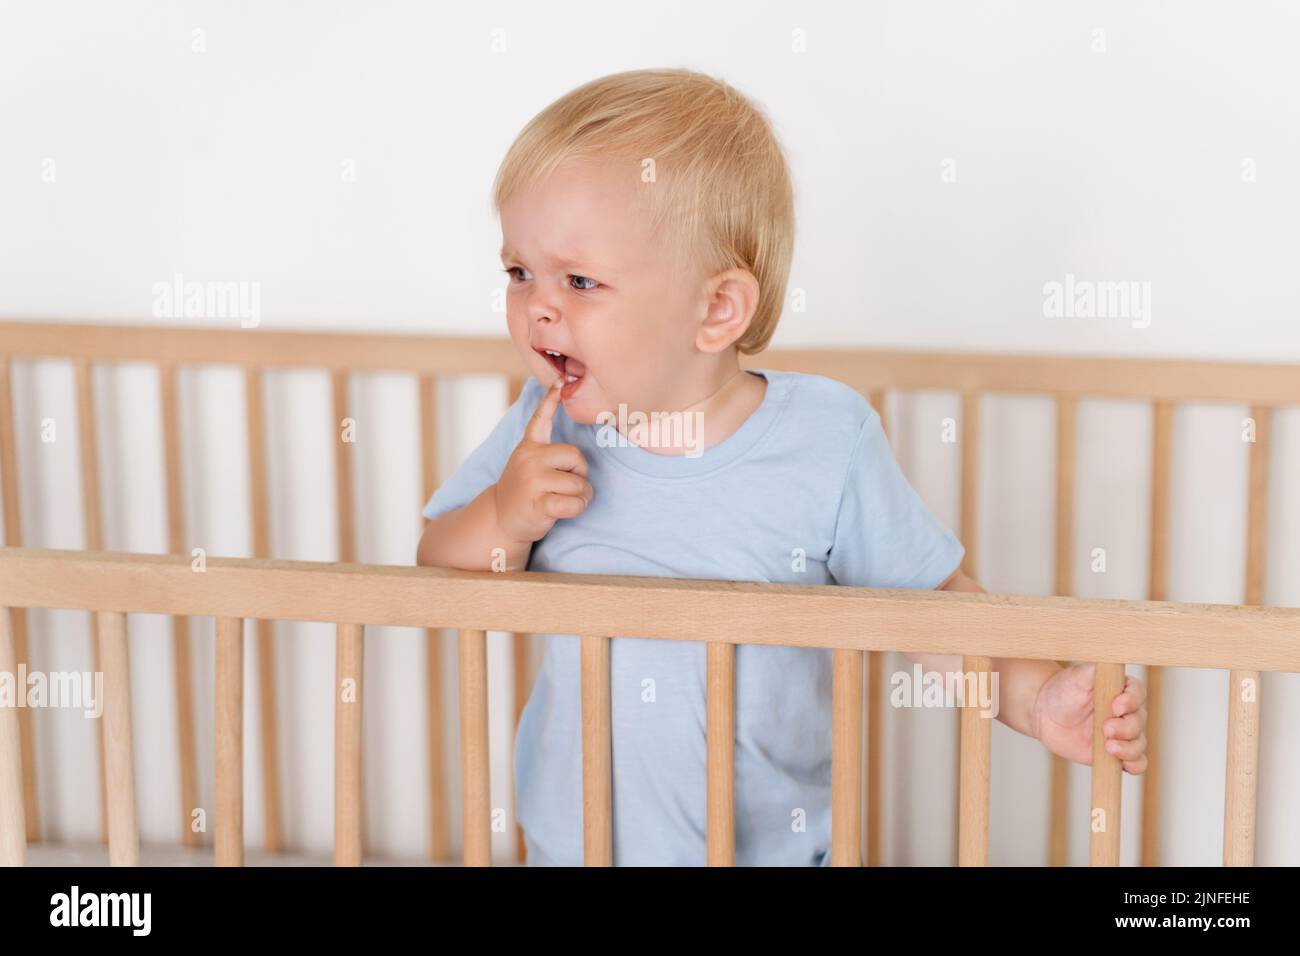 Portrait of cute baby boy standing in bed crying while touching itchy gums, growing new milk tooth suffering from teething pain. Childhood and childcare concept. Health care Stock Photo